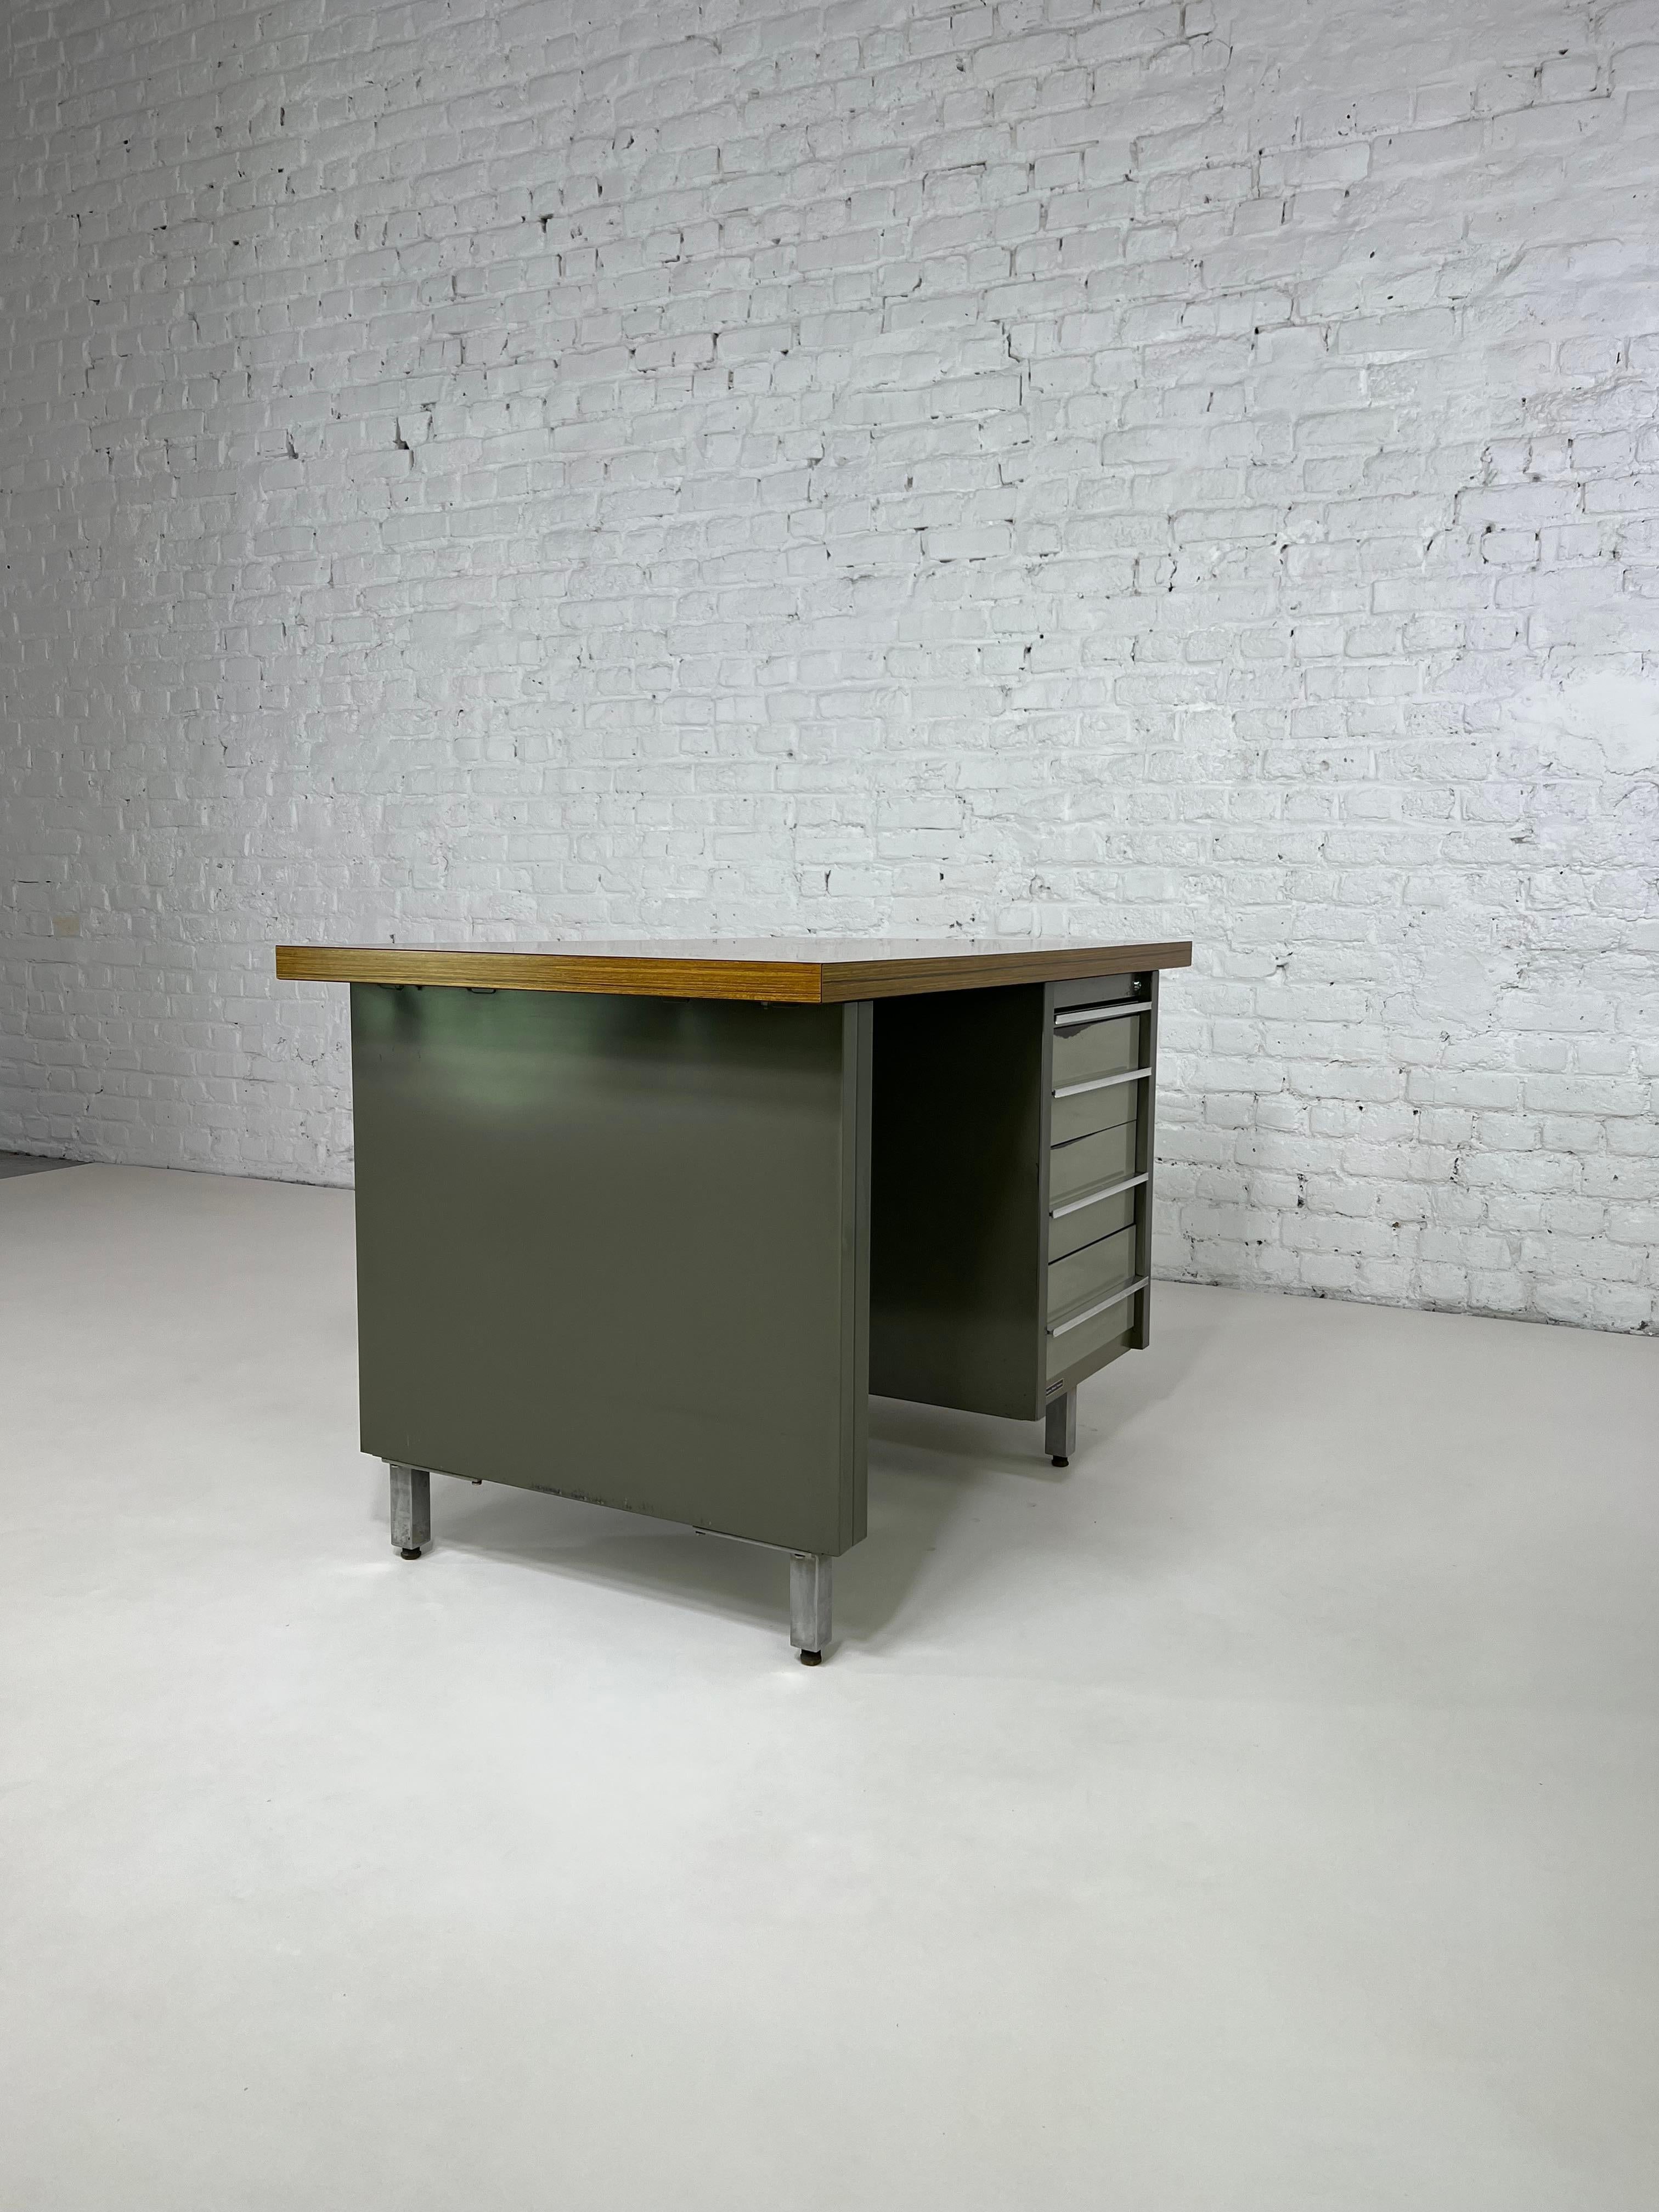 1950s-1960s Remington Rand France Industrial Style Desk For Sale 6